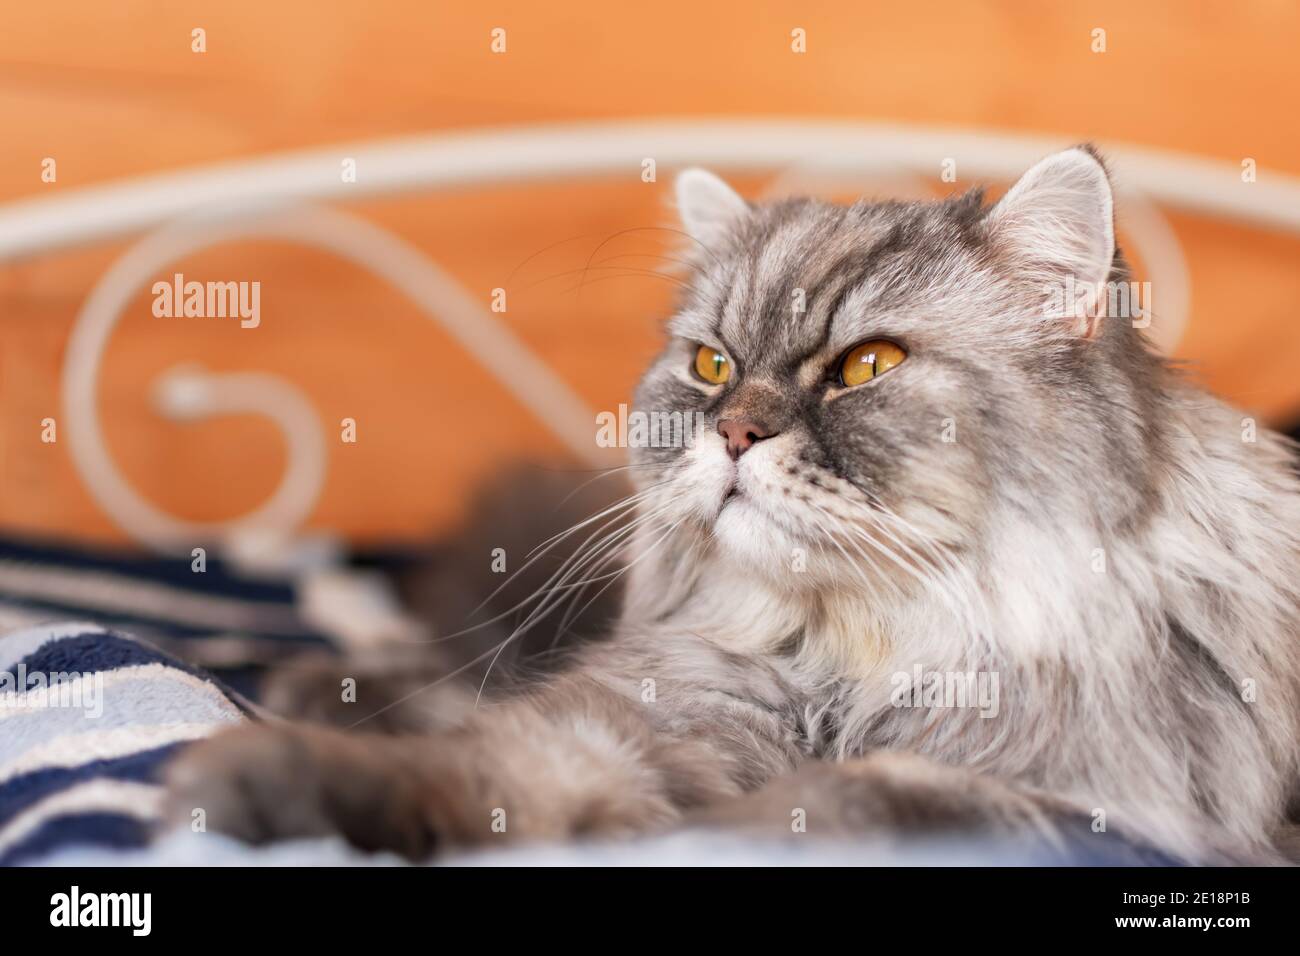 A fluffy Scottish cat with orange eyes lies on the bed and looks away. A sleepy, serious look. Portrait of a pet. Muzzle of a fluffy kitten. Lunch nap Stock Photo